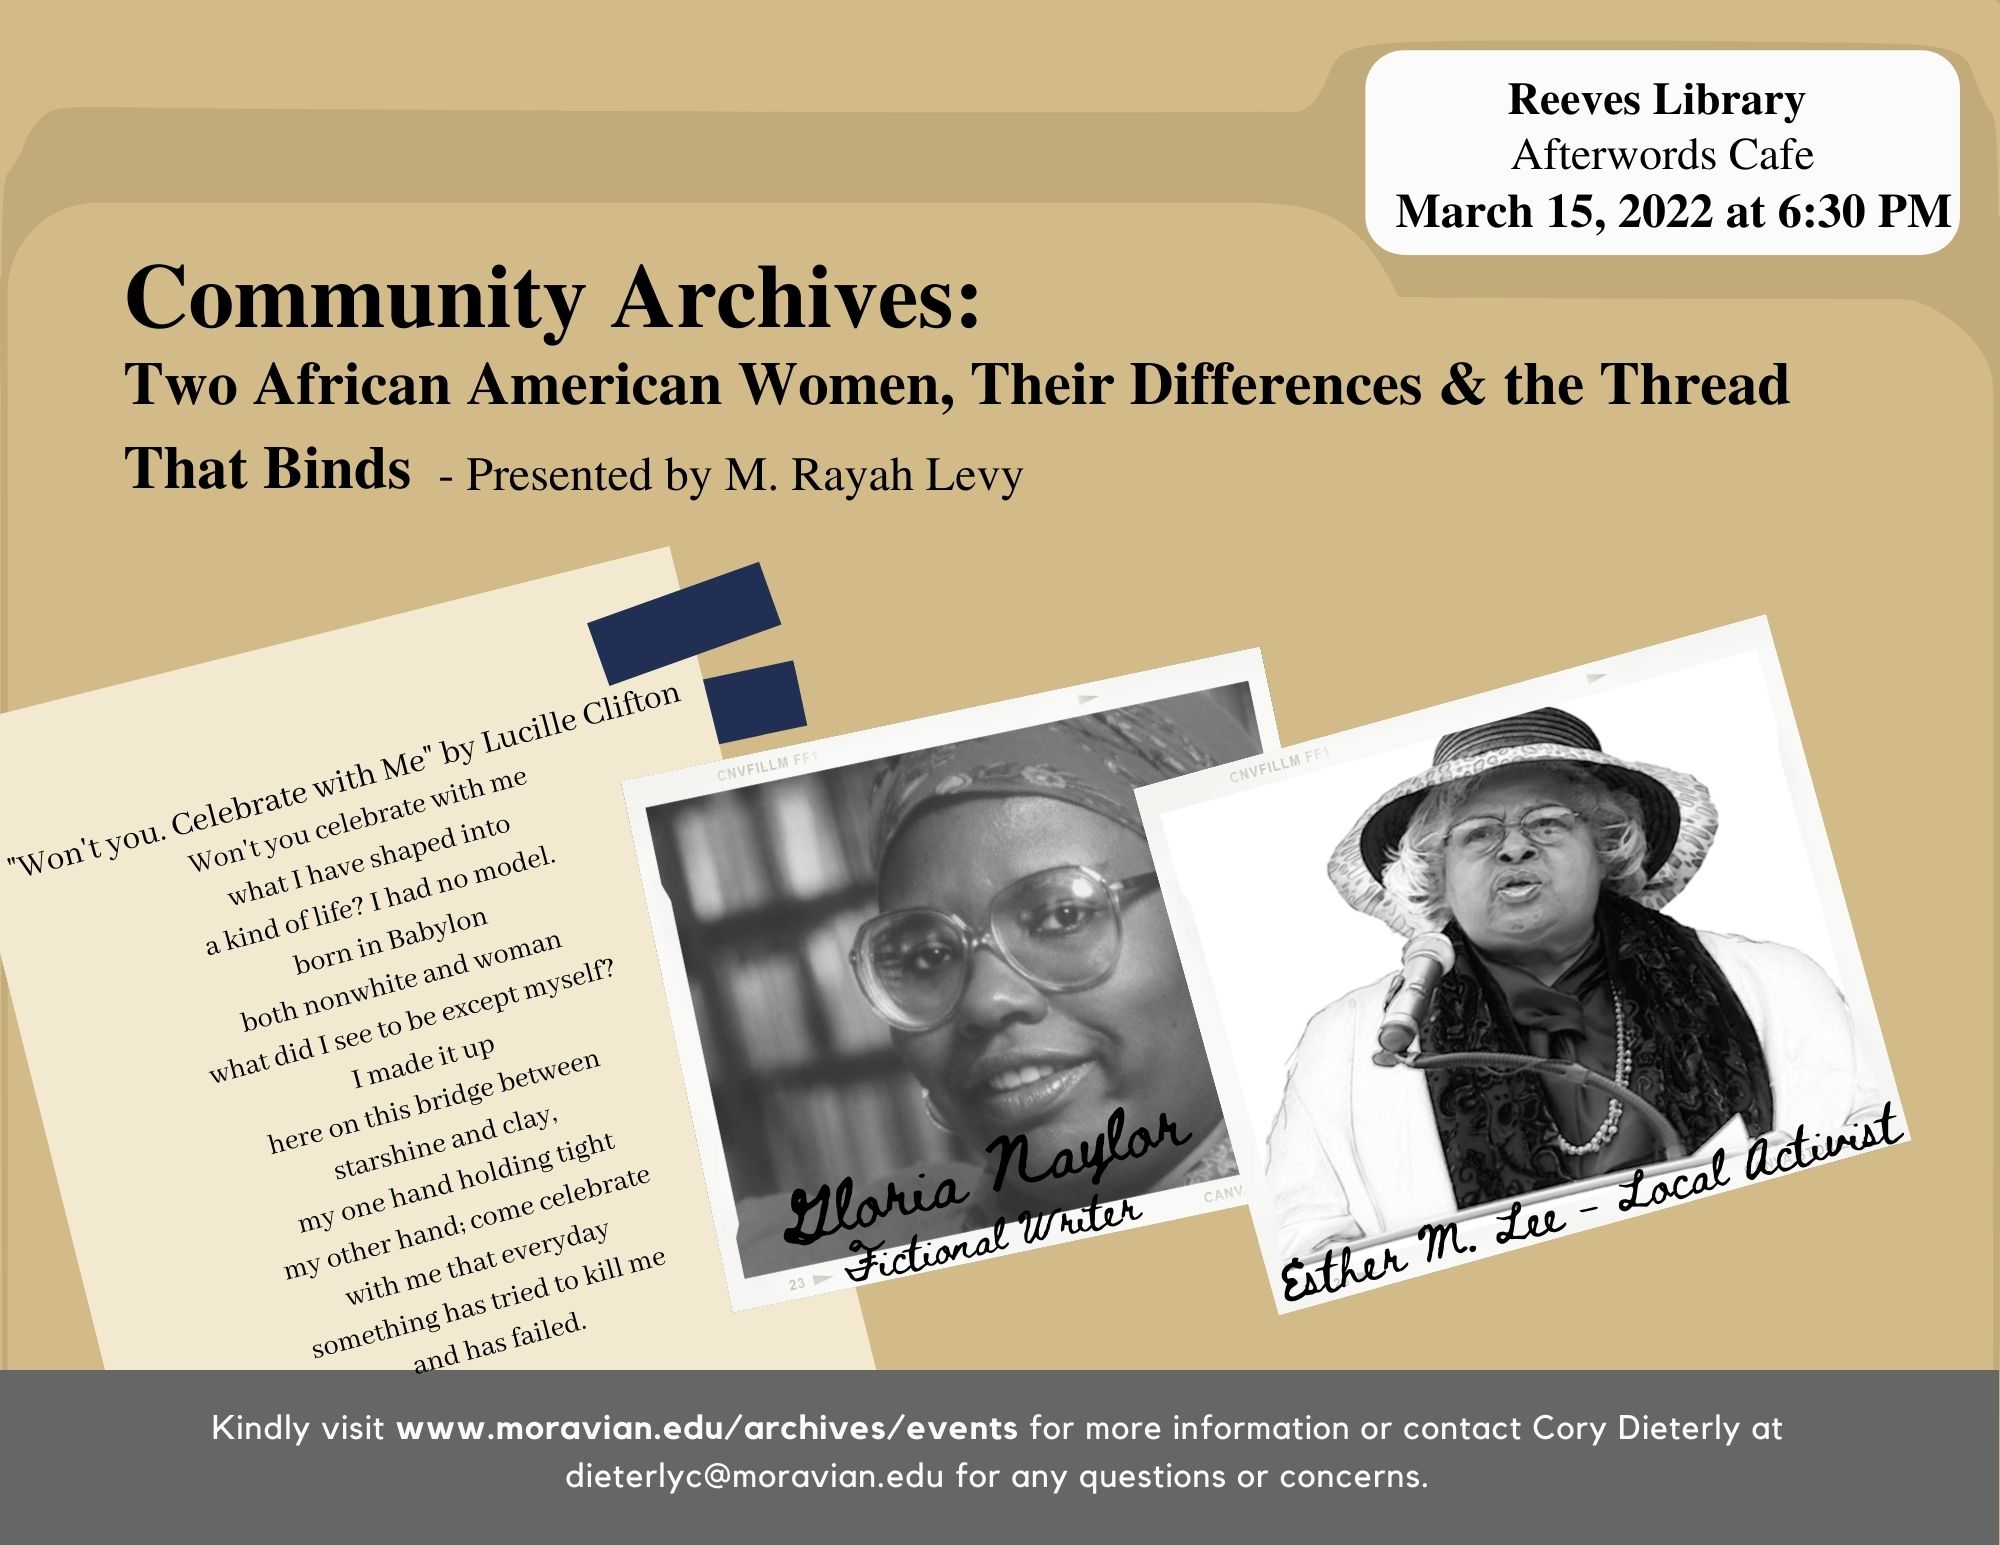 Community Archives Event Flyer